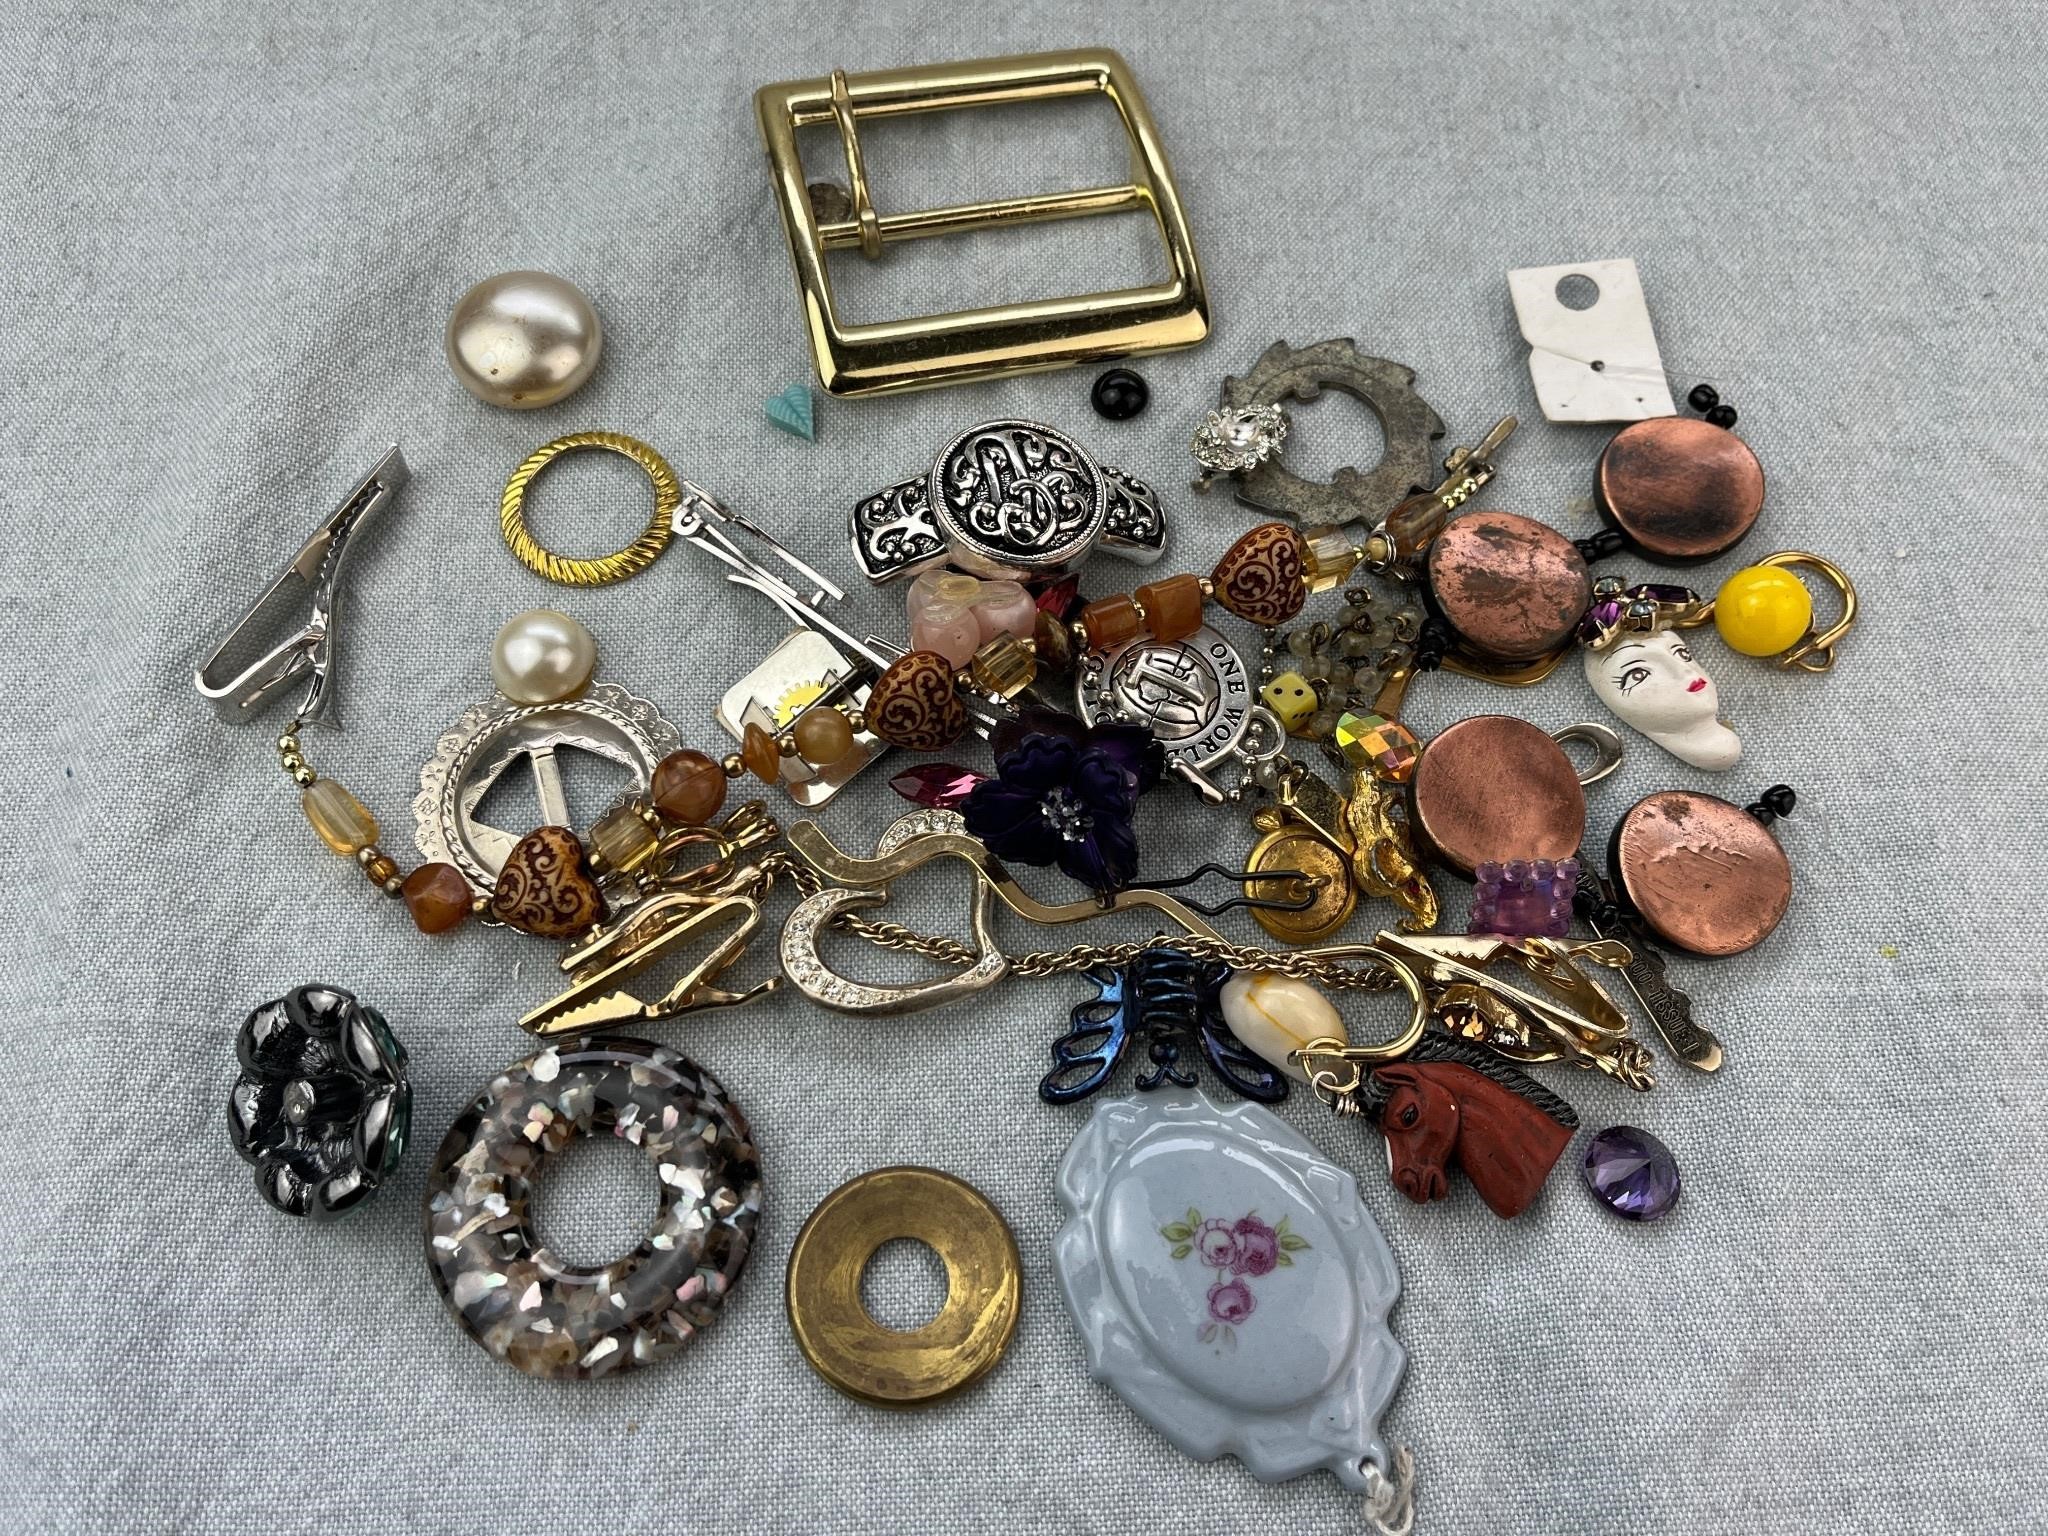 Miscellaneous Pins, Pendants, Clips and More!